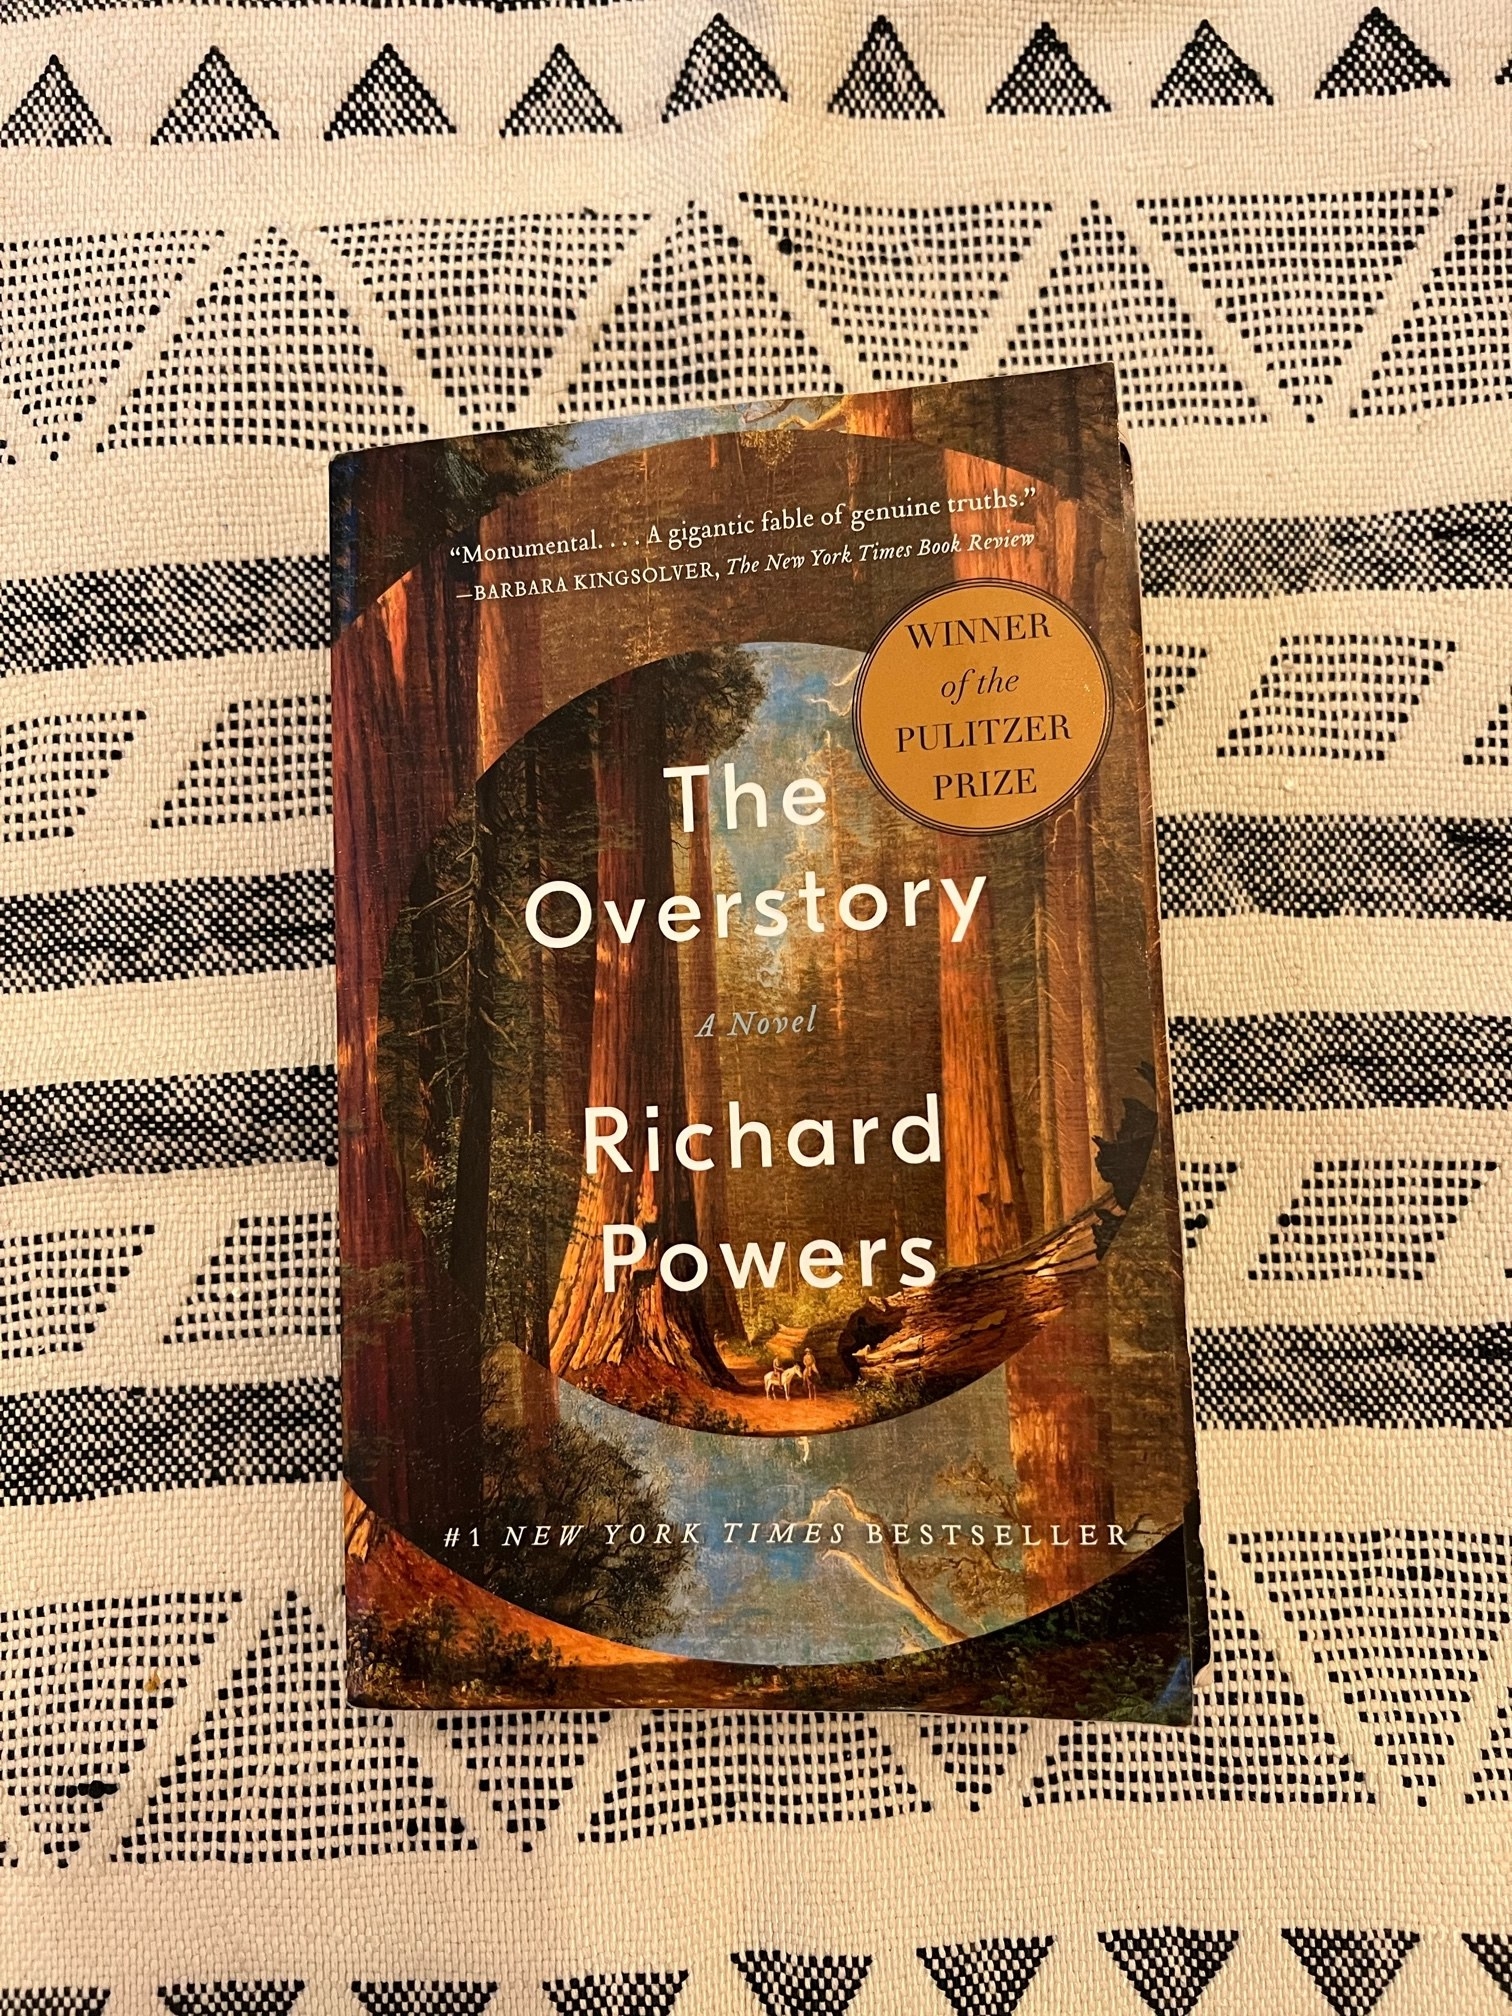 The book cover of &quot;The Overstory&quot; by Richard Powers.